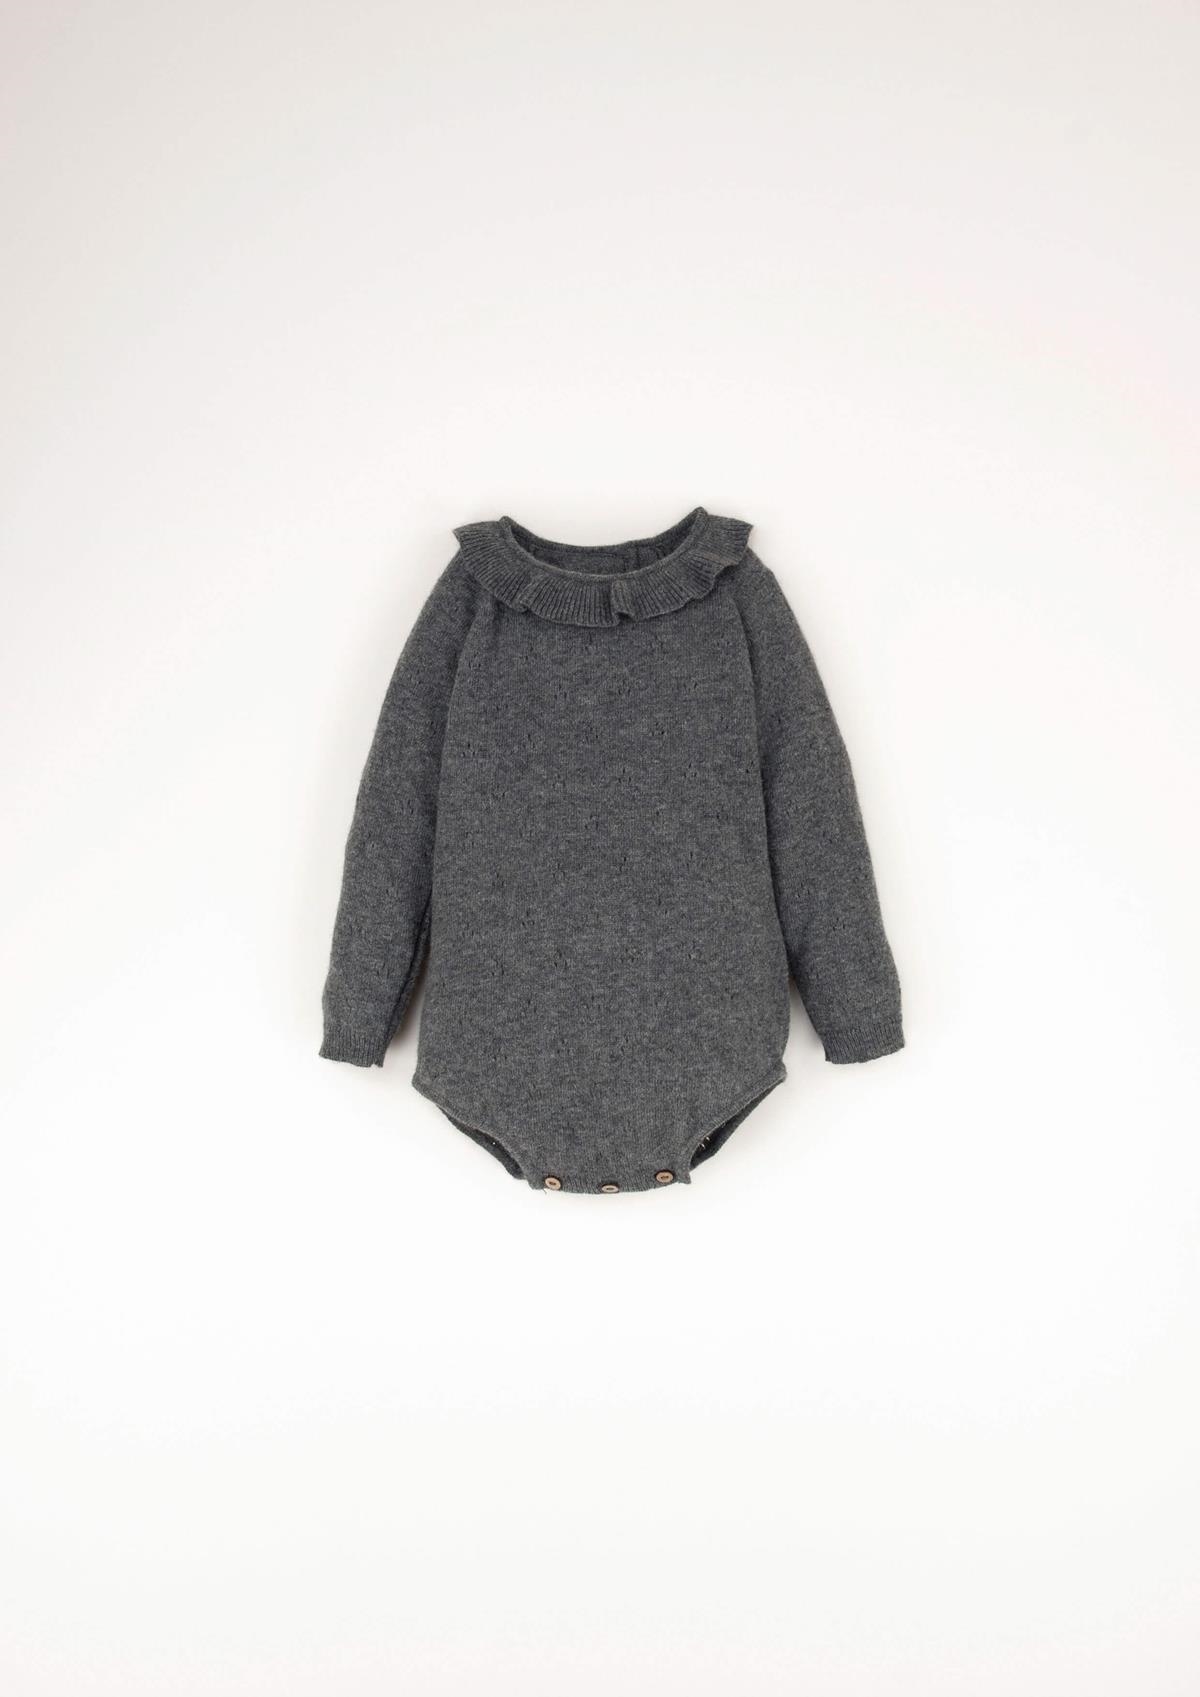 Mod.5.4 Grey knitted romper suit with frilled collar | AW23.24 Mod.5.4 Grey knitted romper suit with frilled collar